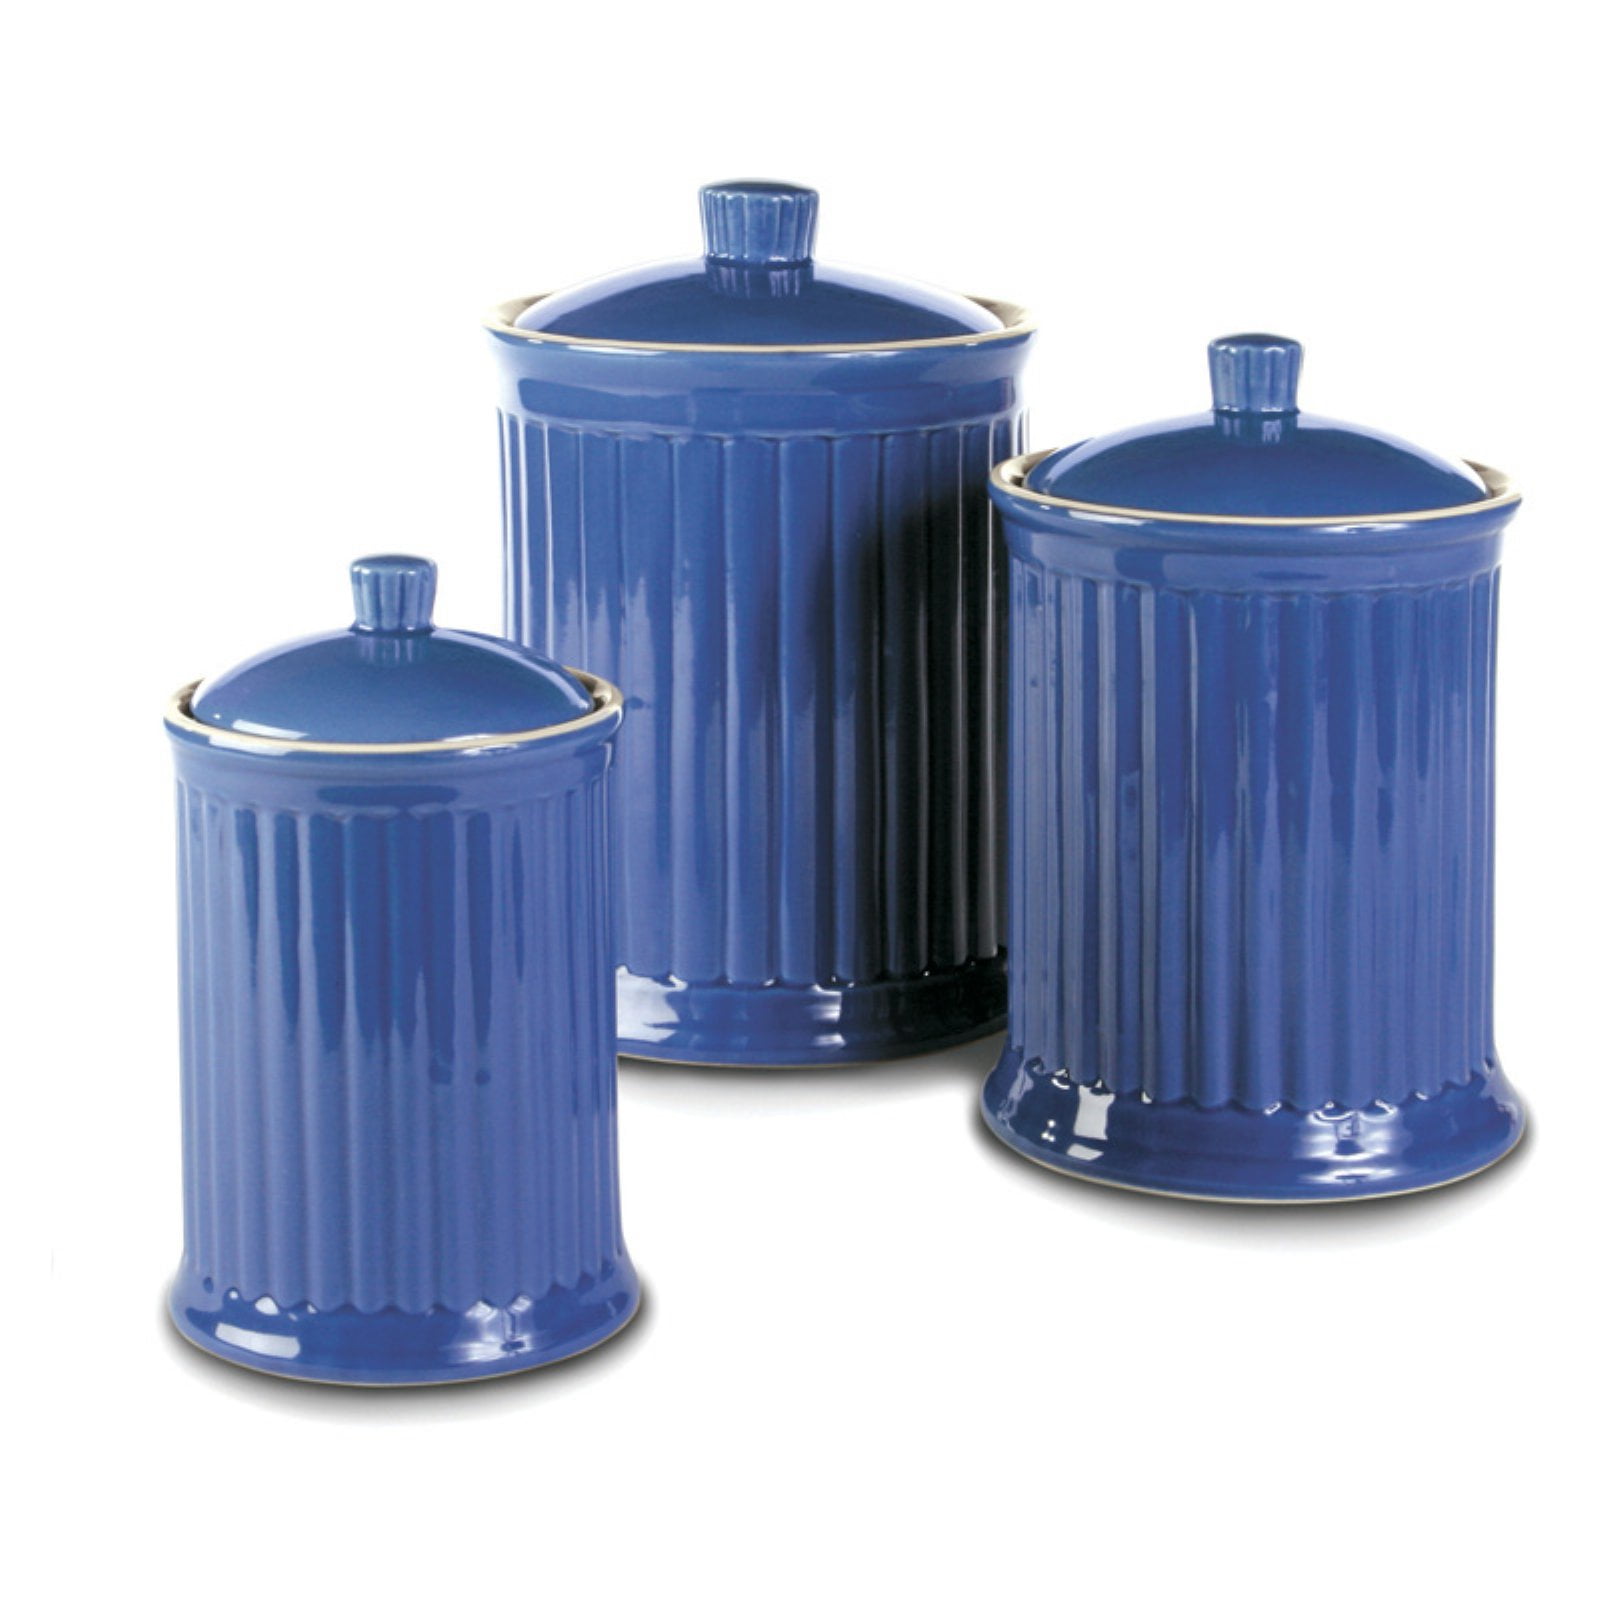 Omni Simsbury Canisters - Set of 3 - Blue